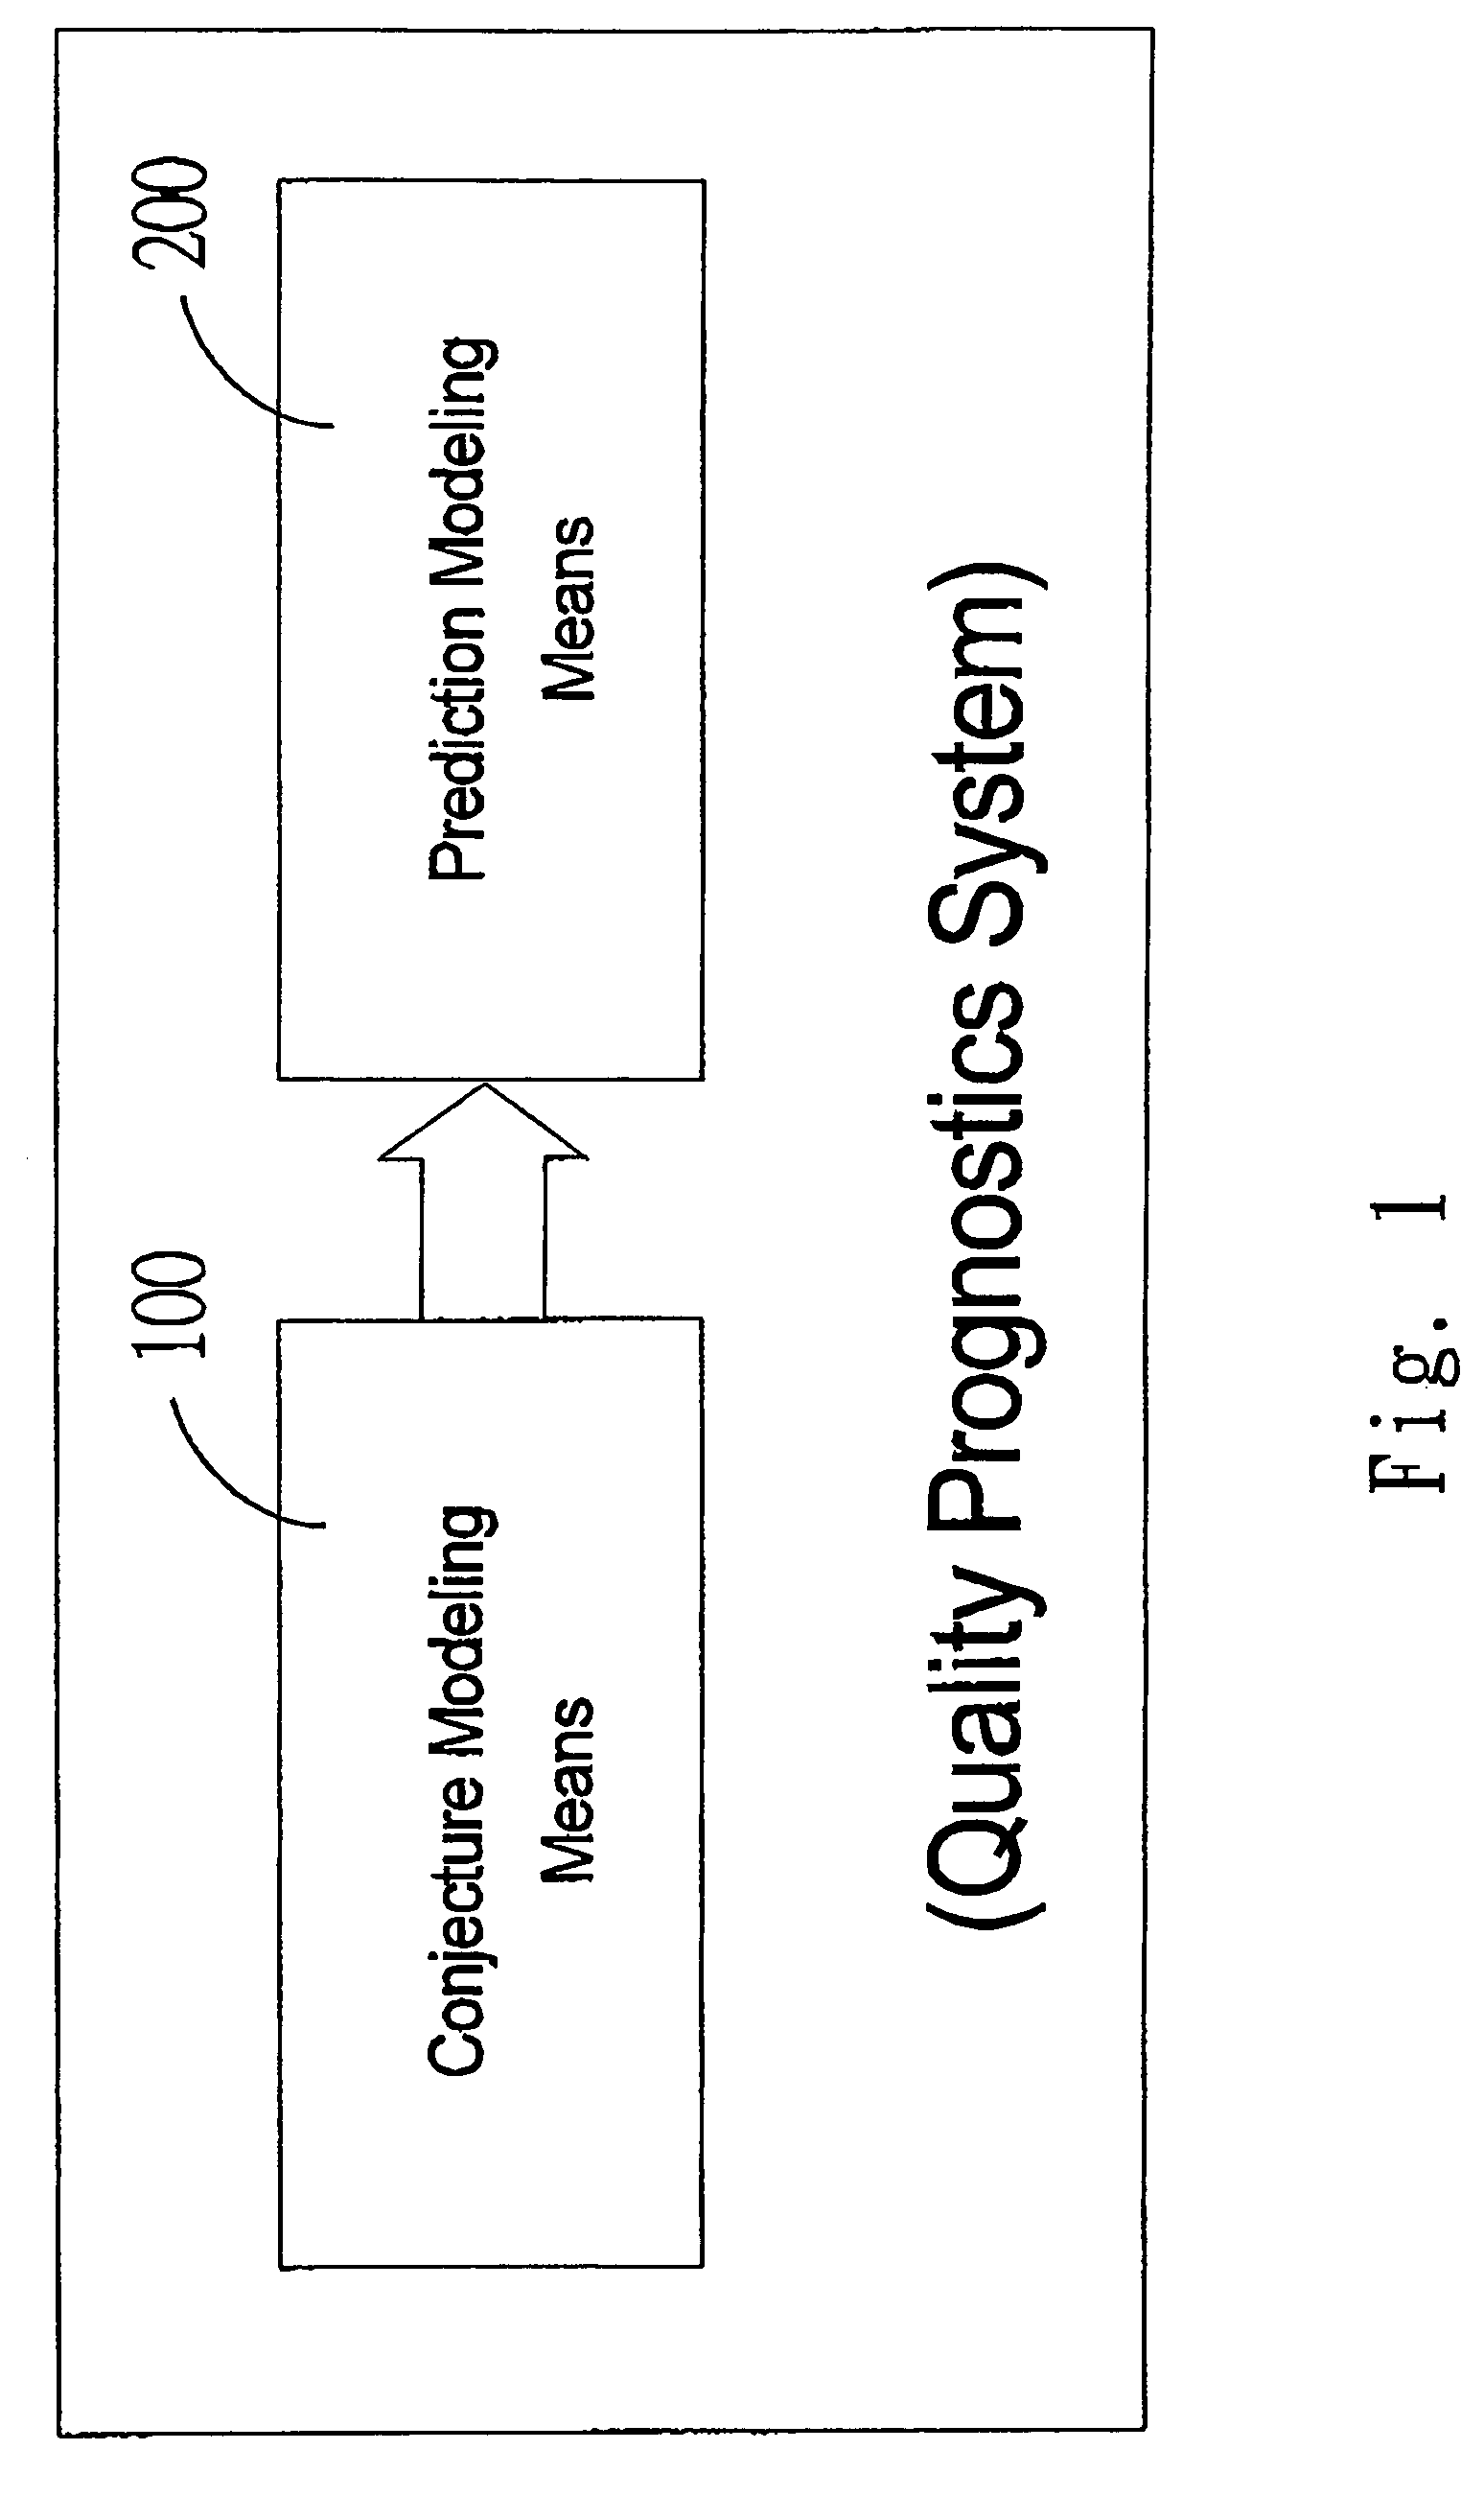 Quality prognostics system and method for manufacturing processes